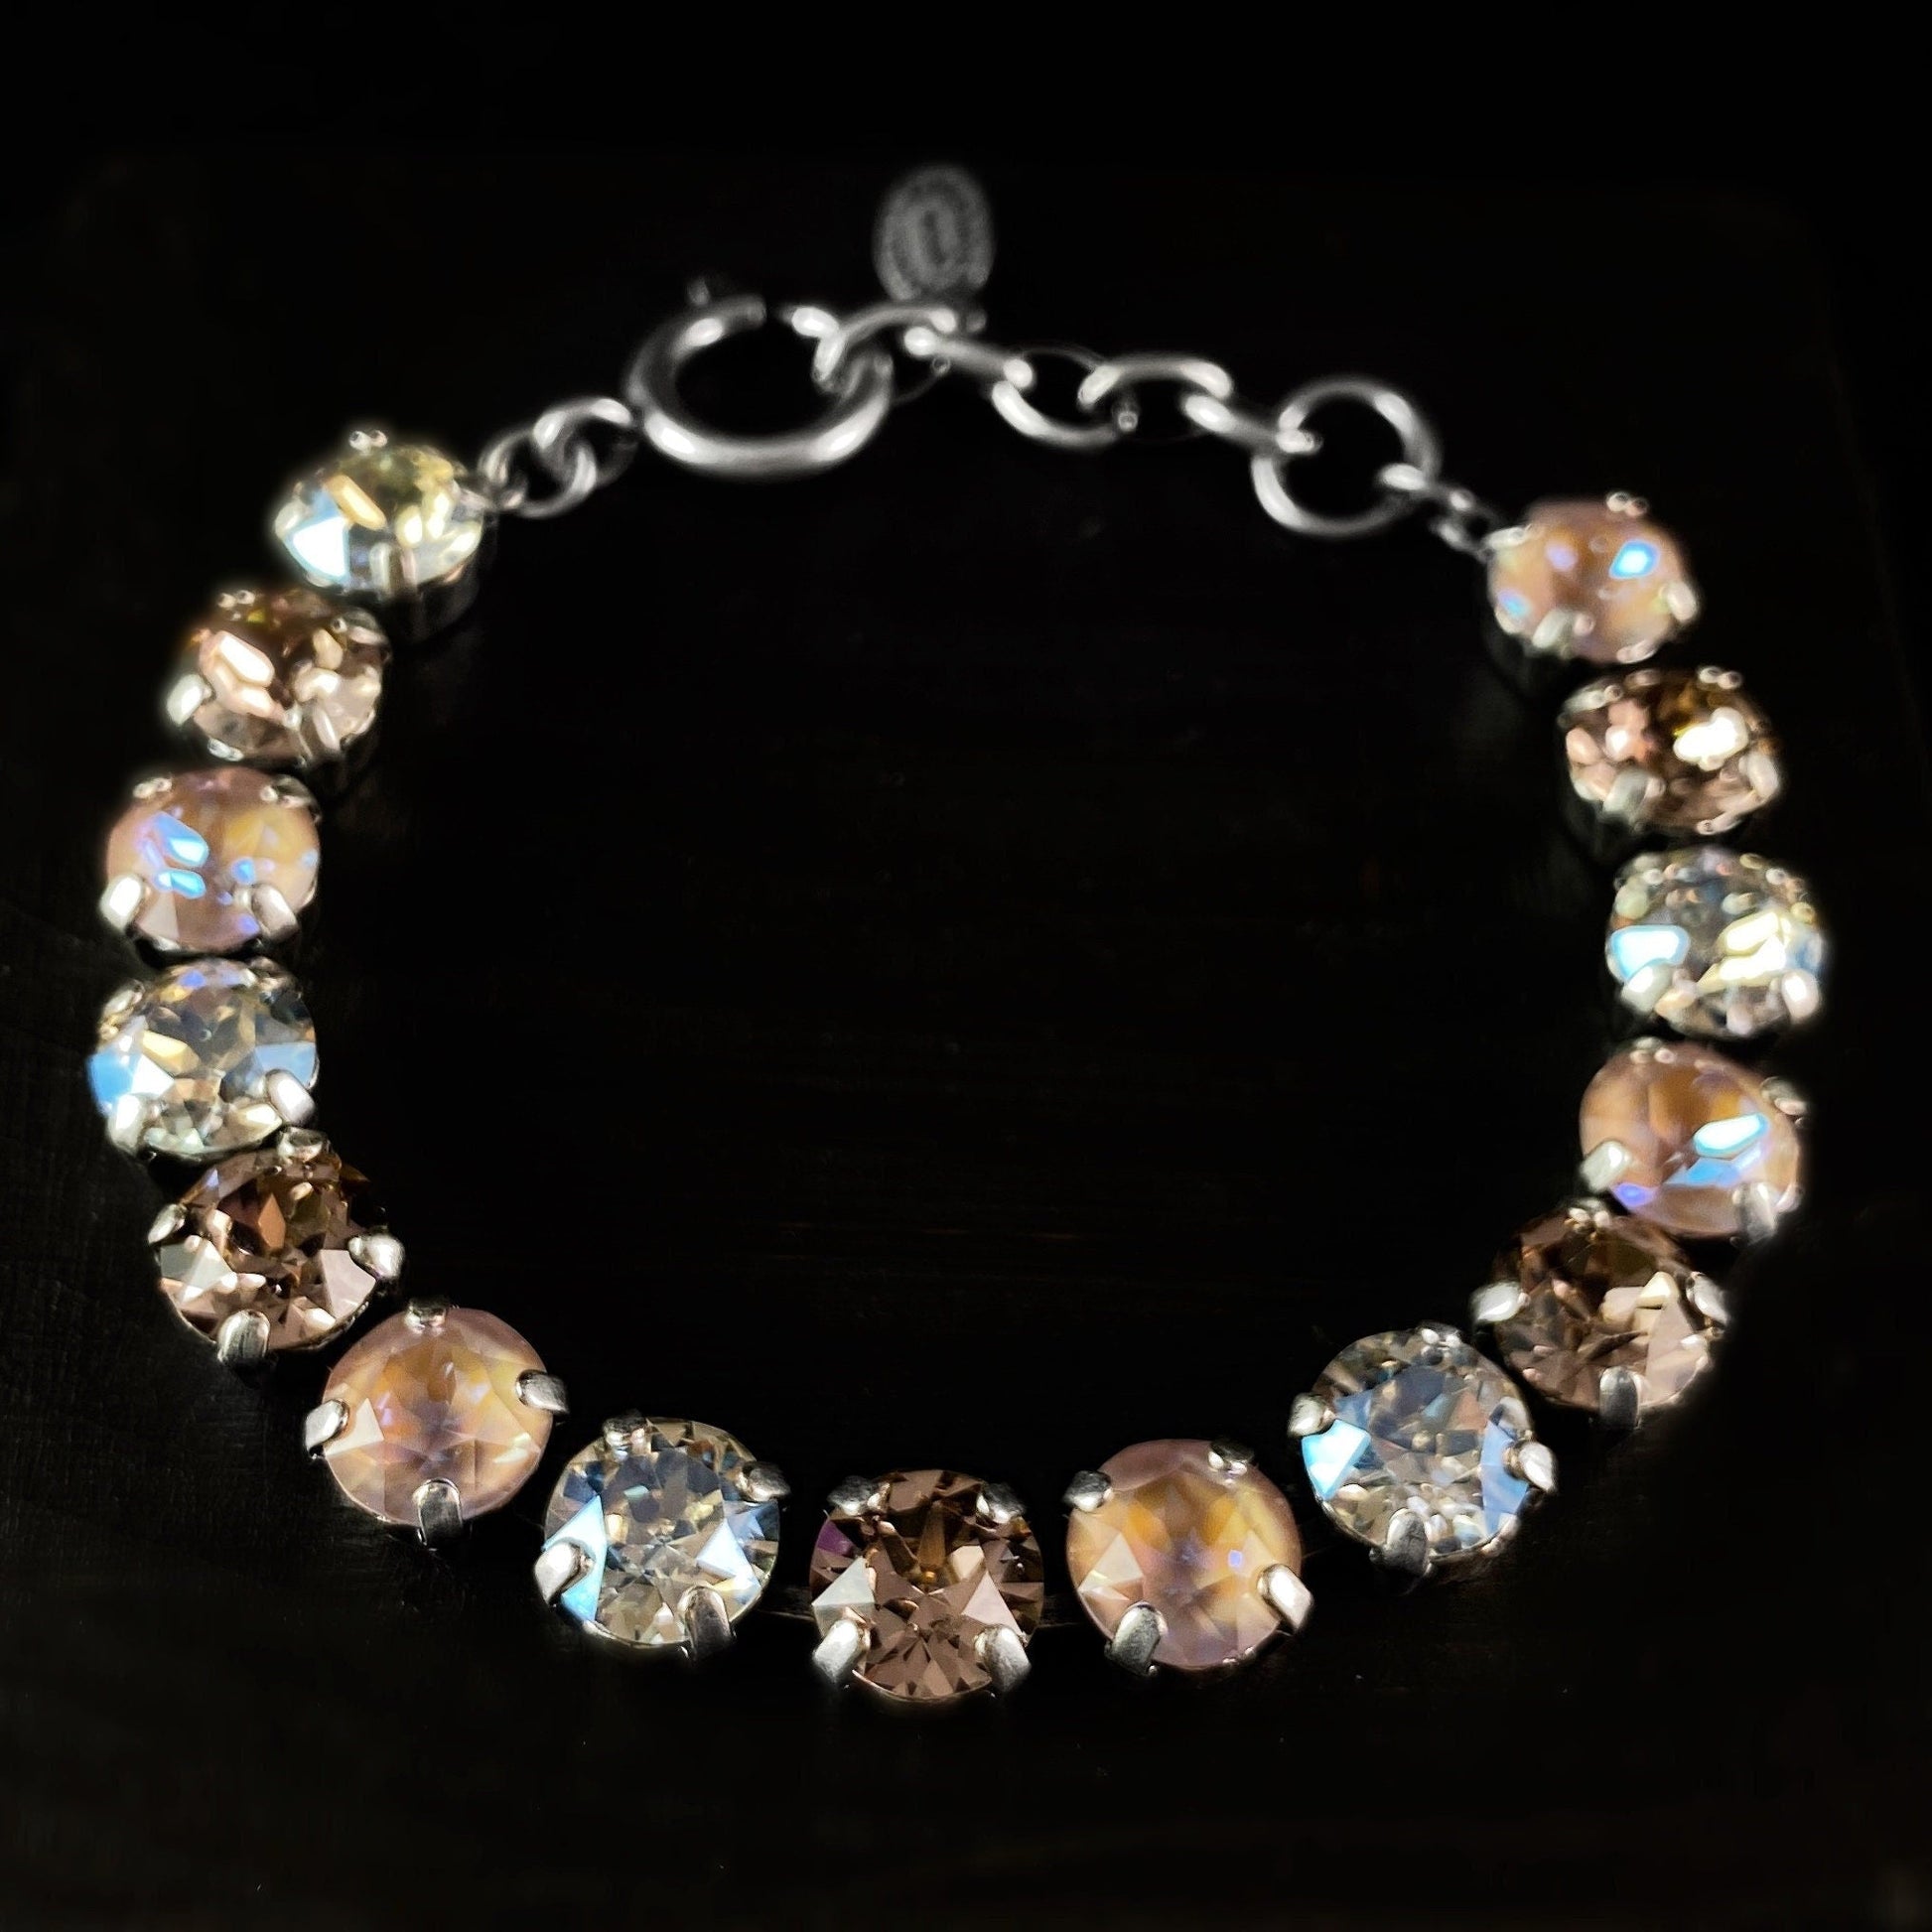 Multicolor Swarovski Crystal Bracelet with Pink, Clear, and Milky Crystals - La Vie Parisienne by Catherine Popesco